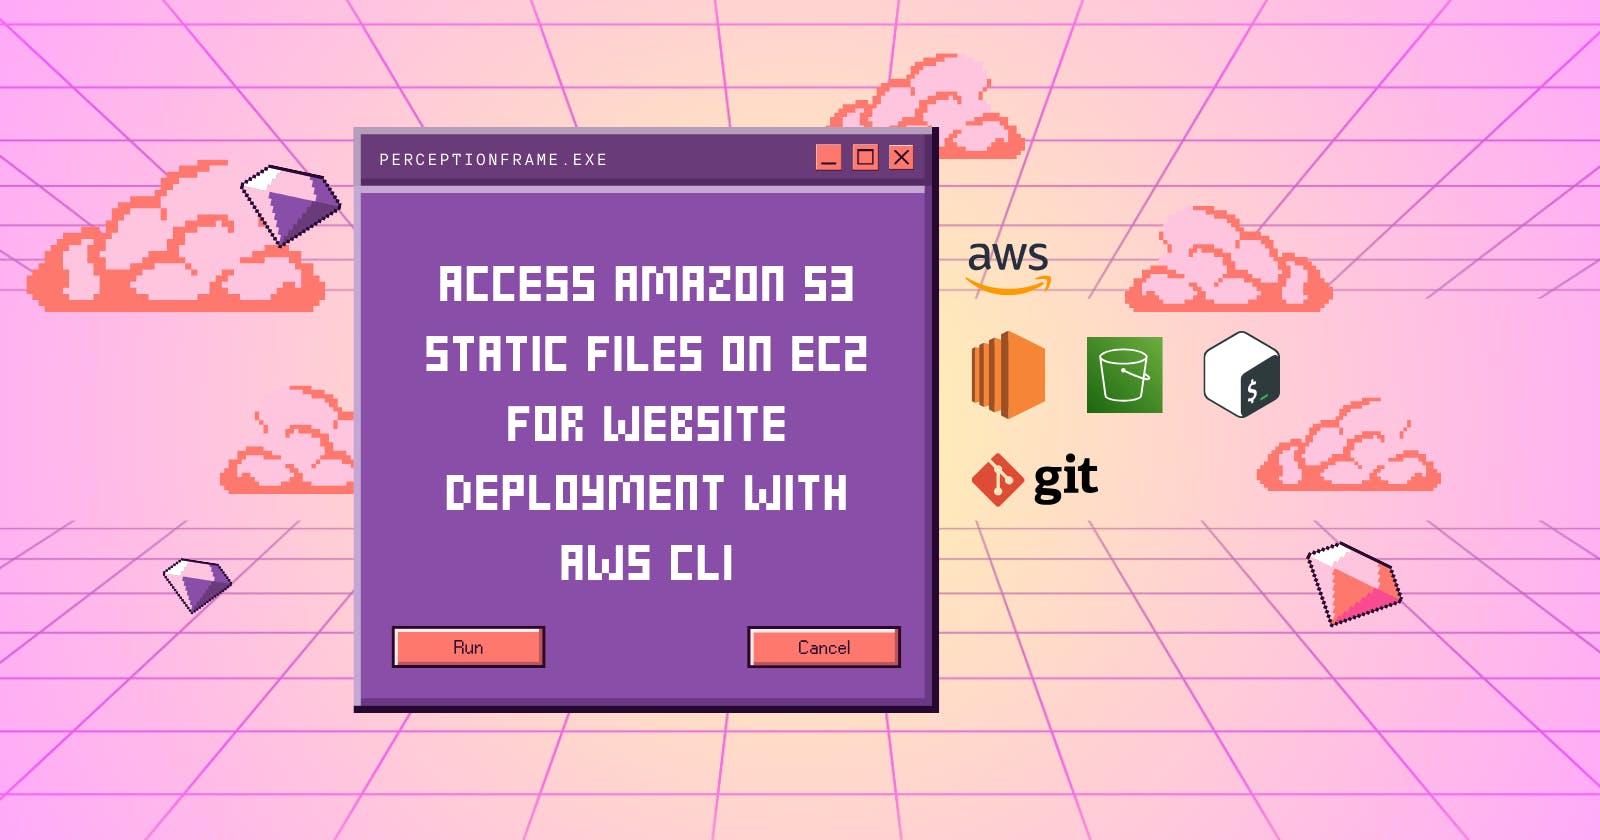 Access Amazon S3 static files on EC2 for website deployment with AWS CLI